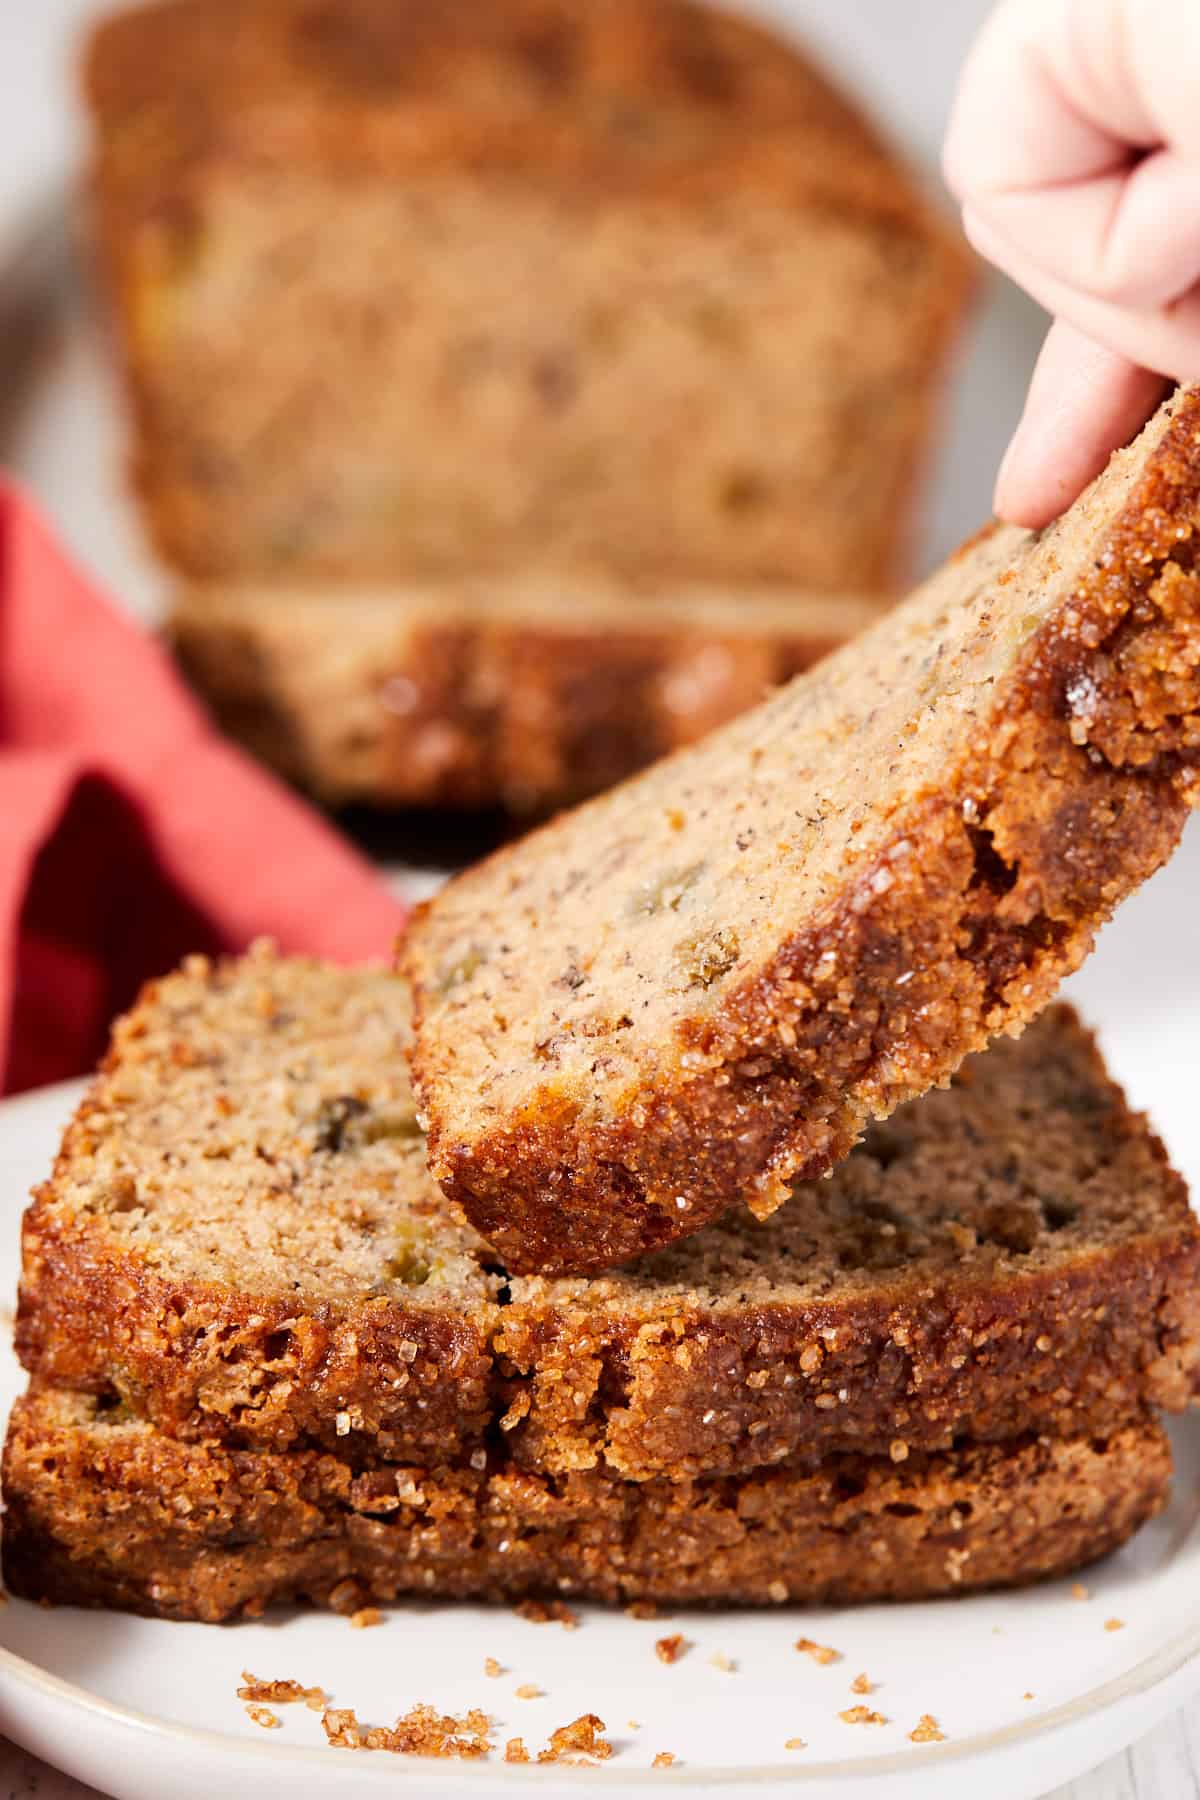 Three slices of Rhubarb banana bread are sitting on a plate with one slice being lifted by a hand.